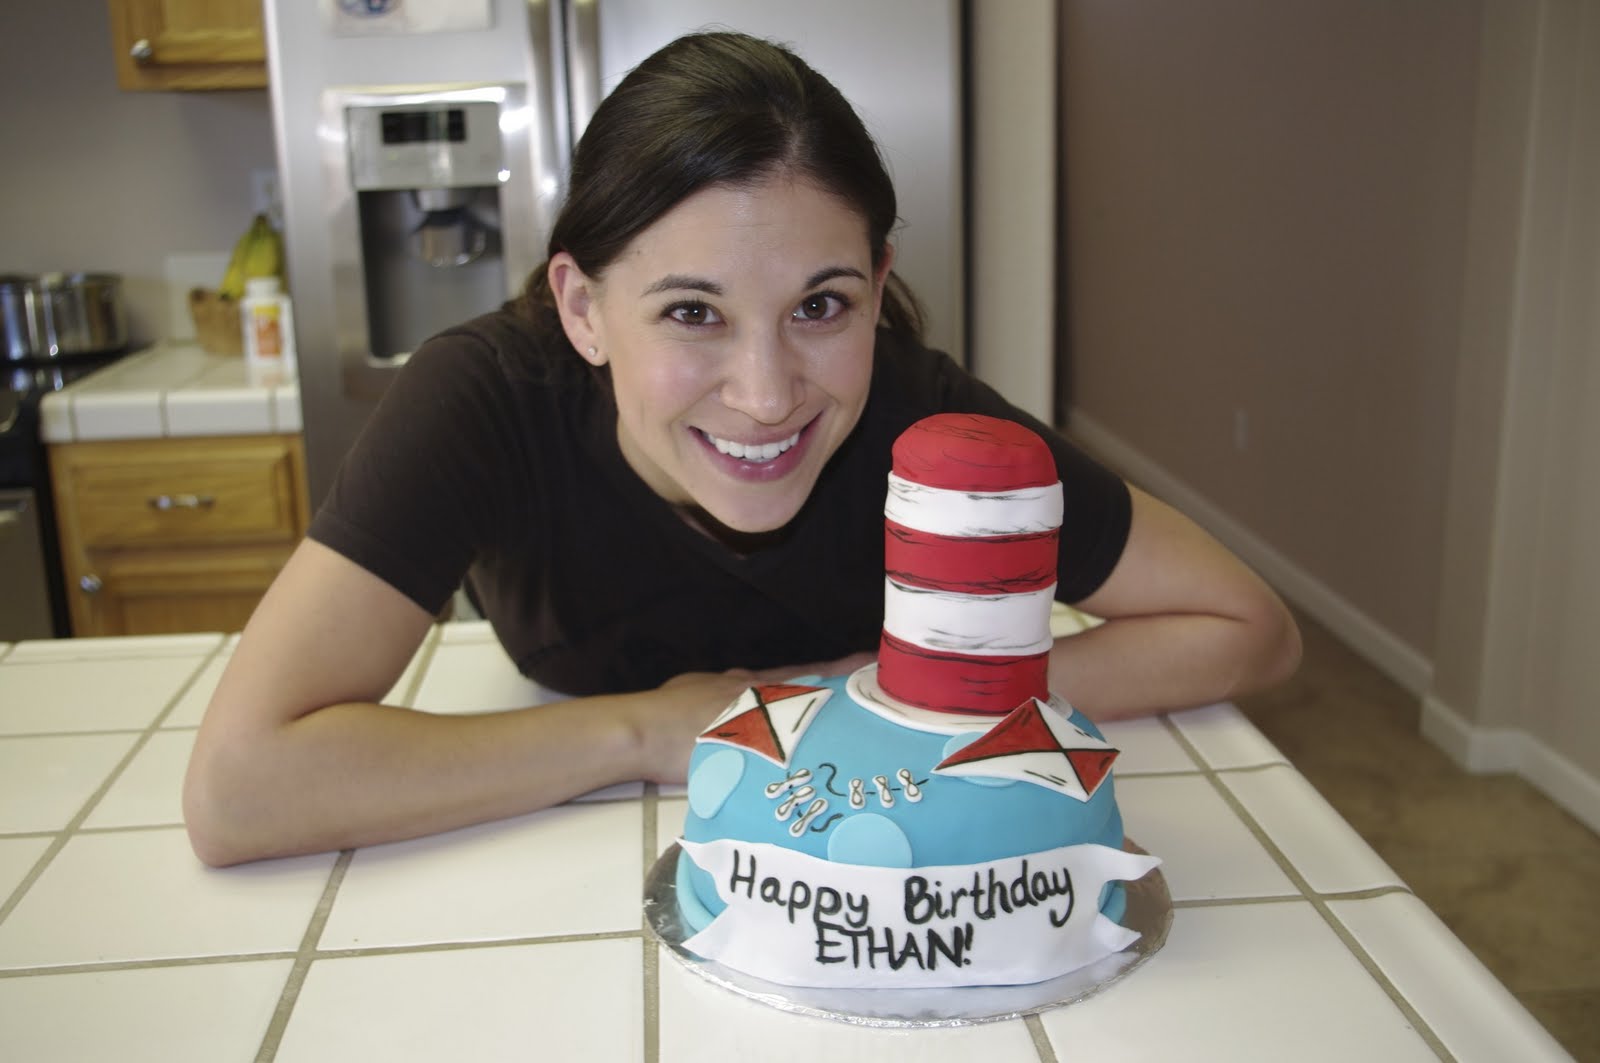 diy wedding cake stands Cat in the Hat cake